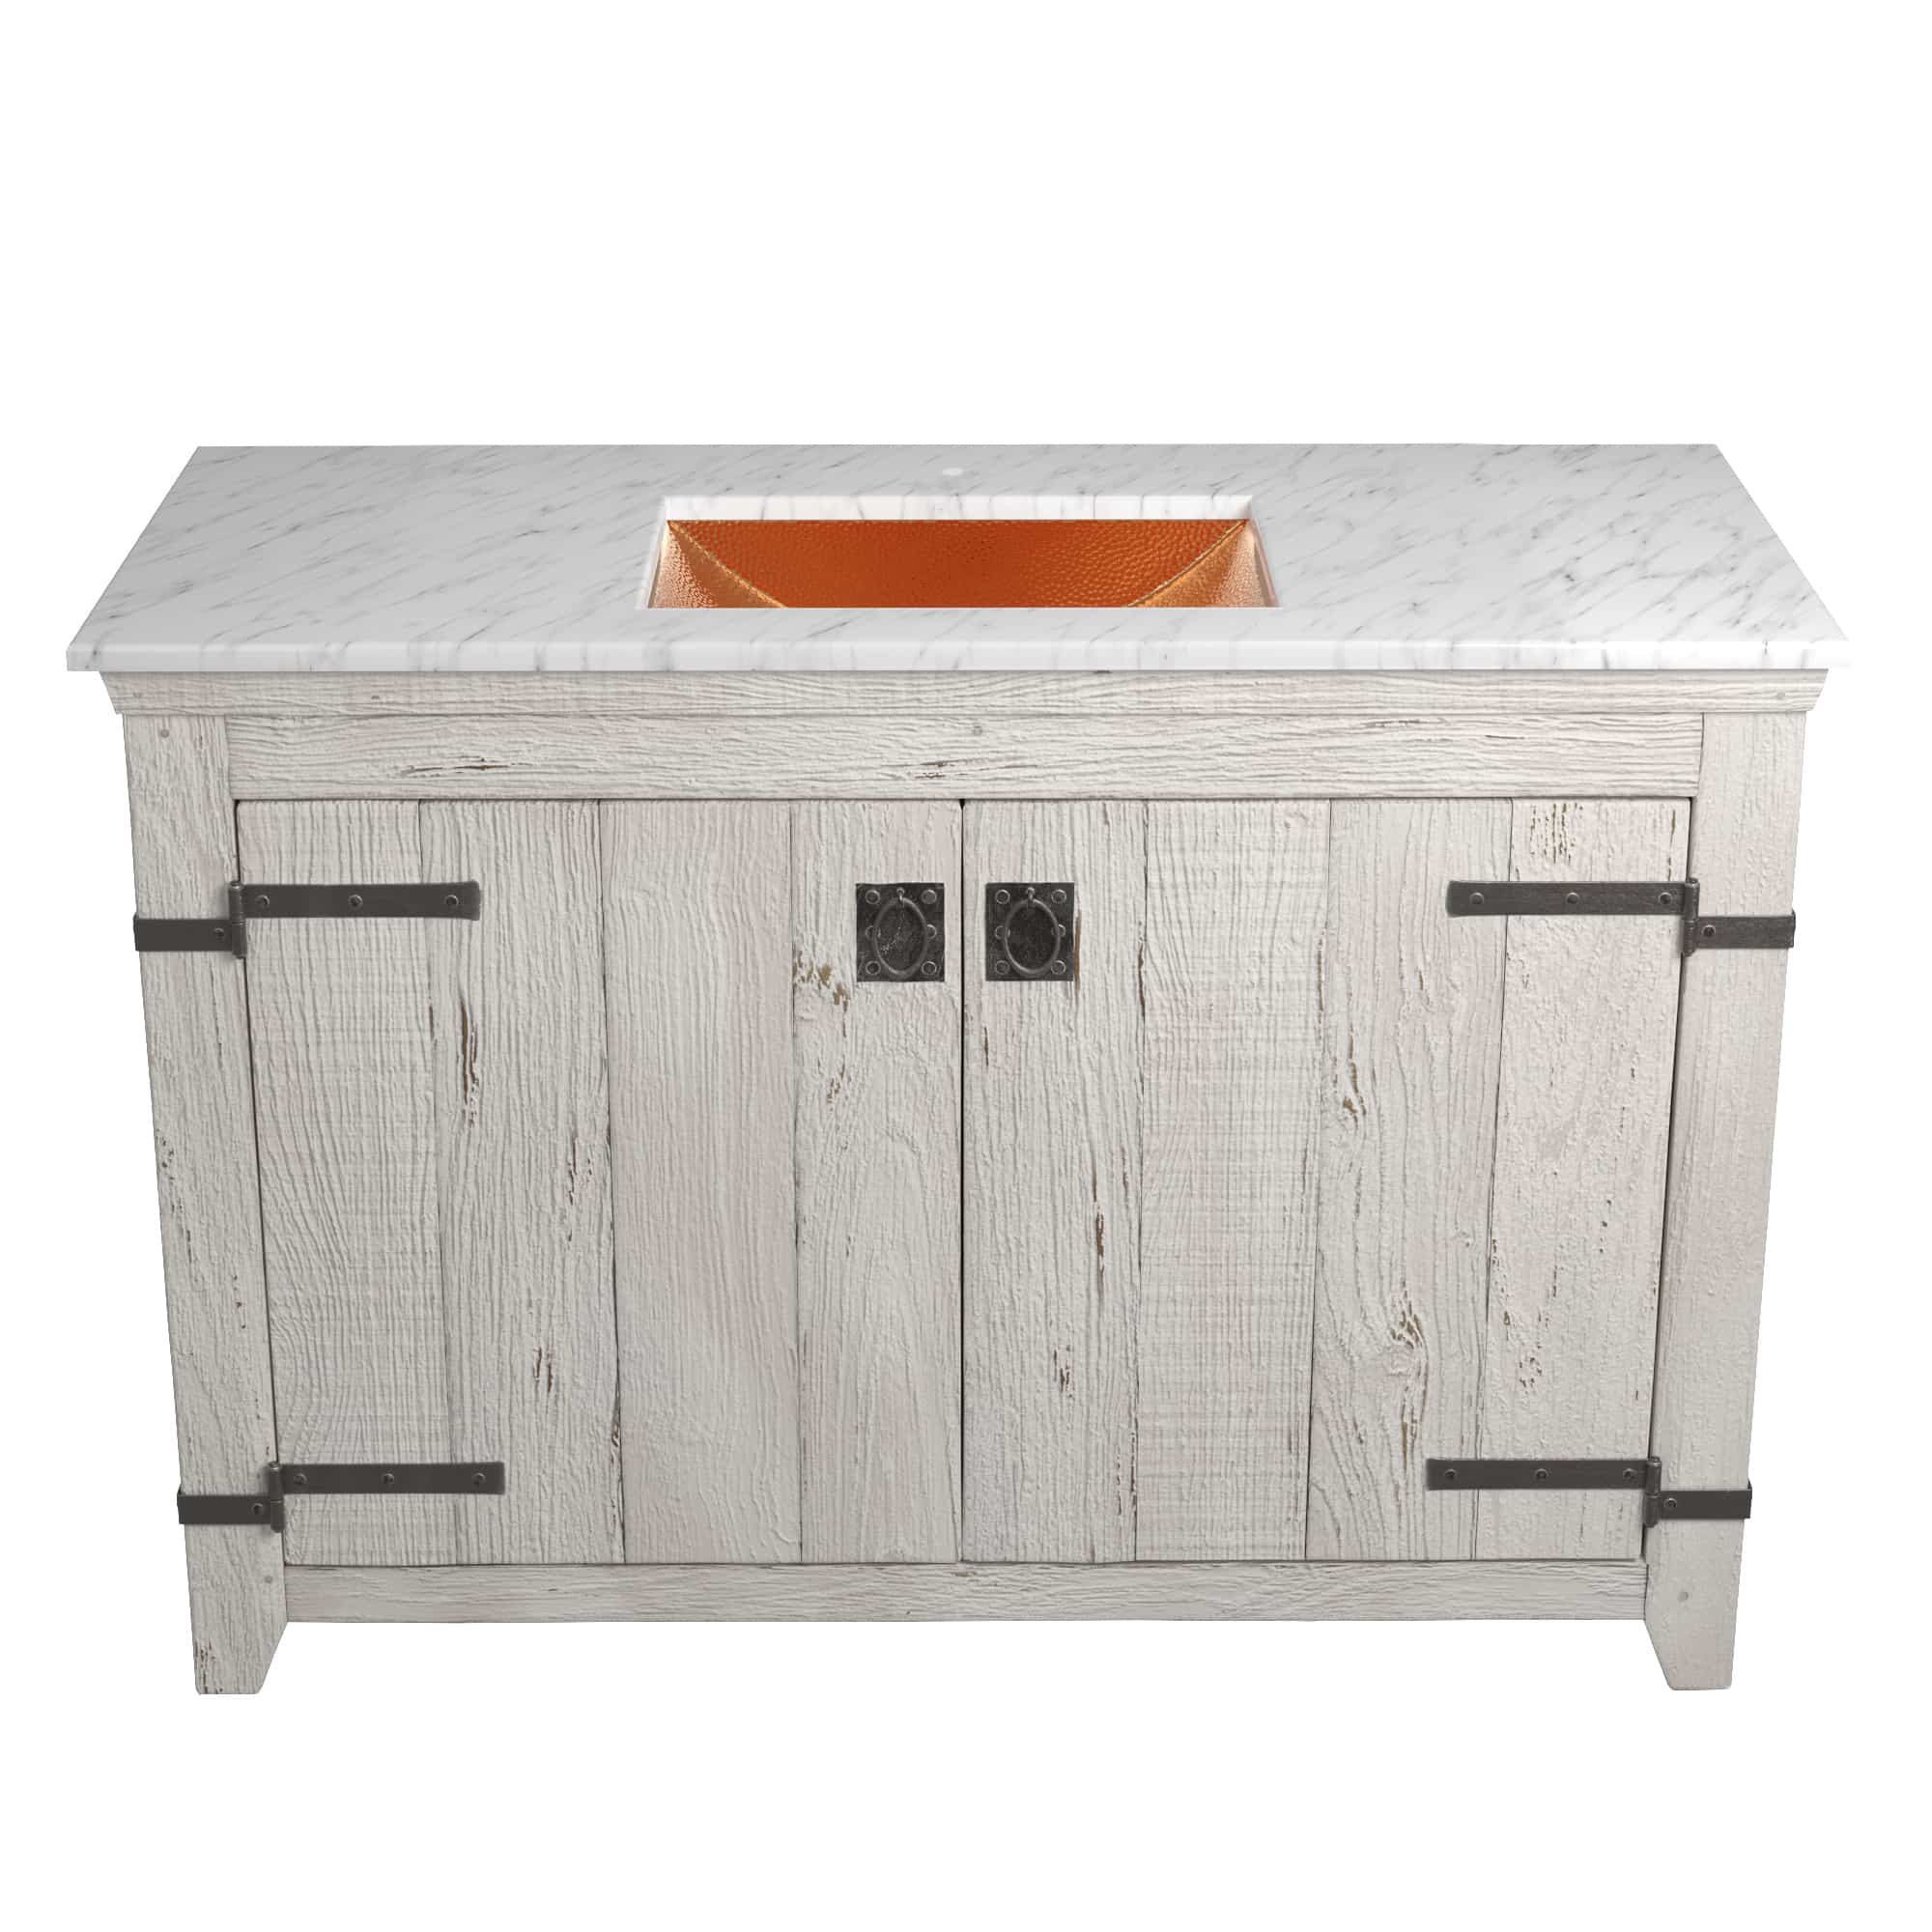 Native Trails 48" Americana Vanity in Whitewash with Carrara Marble Top and Avila in Polished Copper, Single Faucet Hole, BND48-VB-CT-CP-009